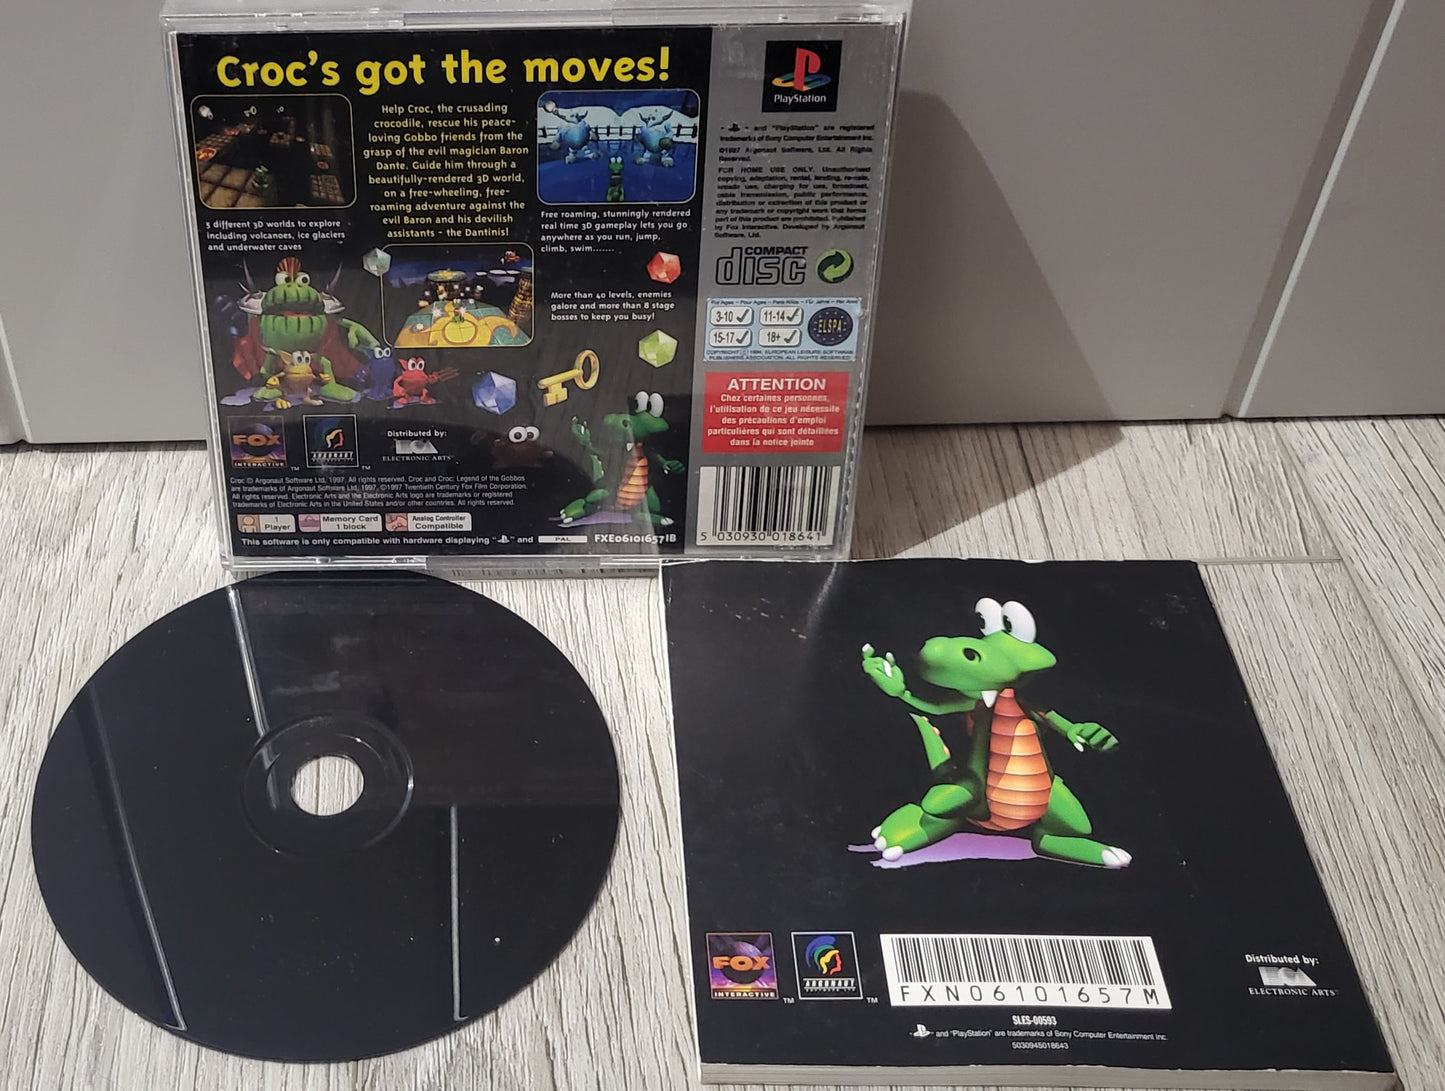 Croc Legend of the Gobbos Platinum Sony Playstation 1 (PS1) Game